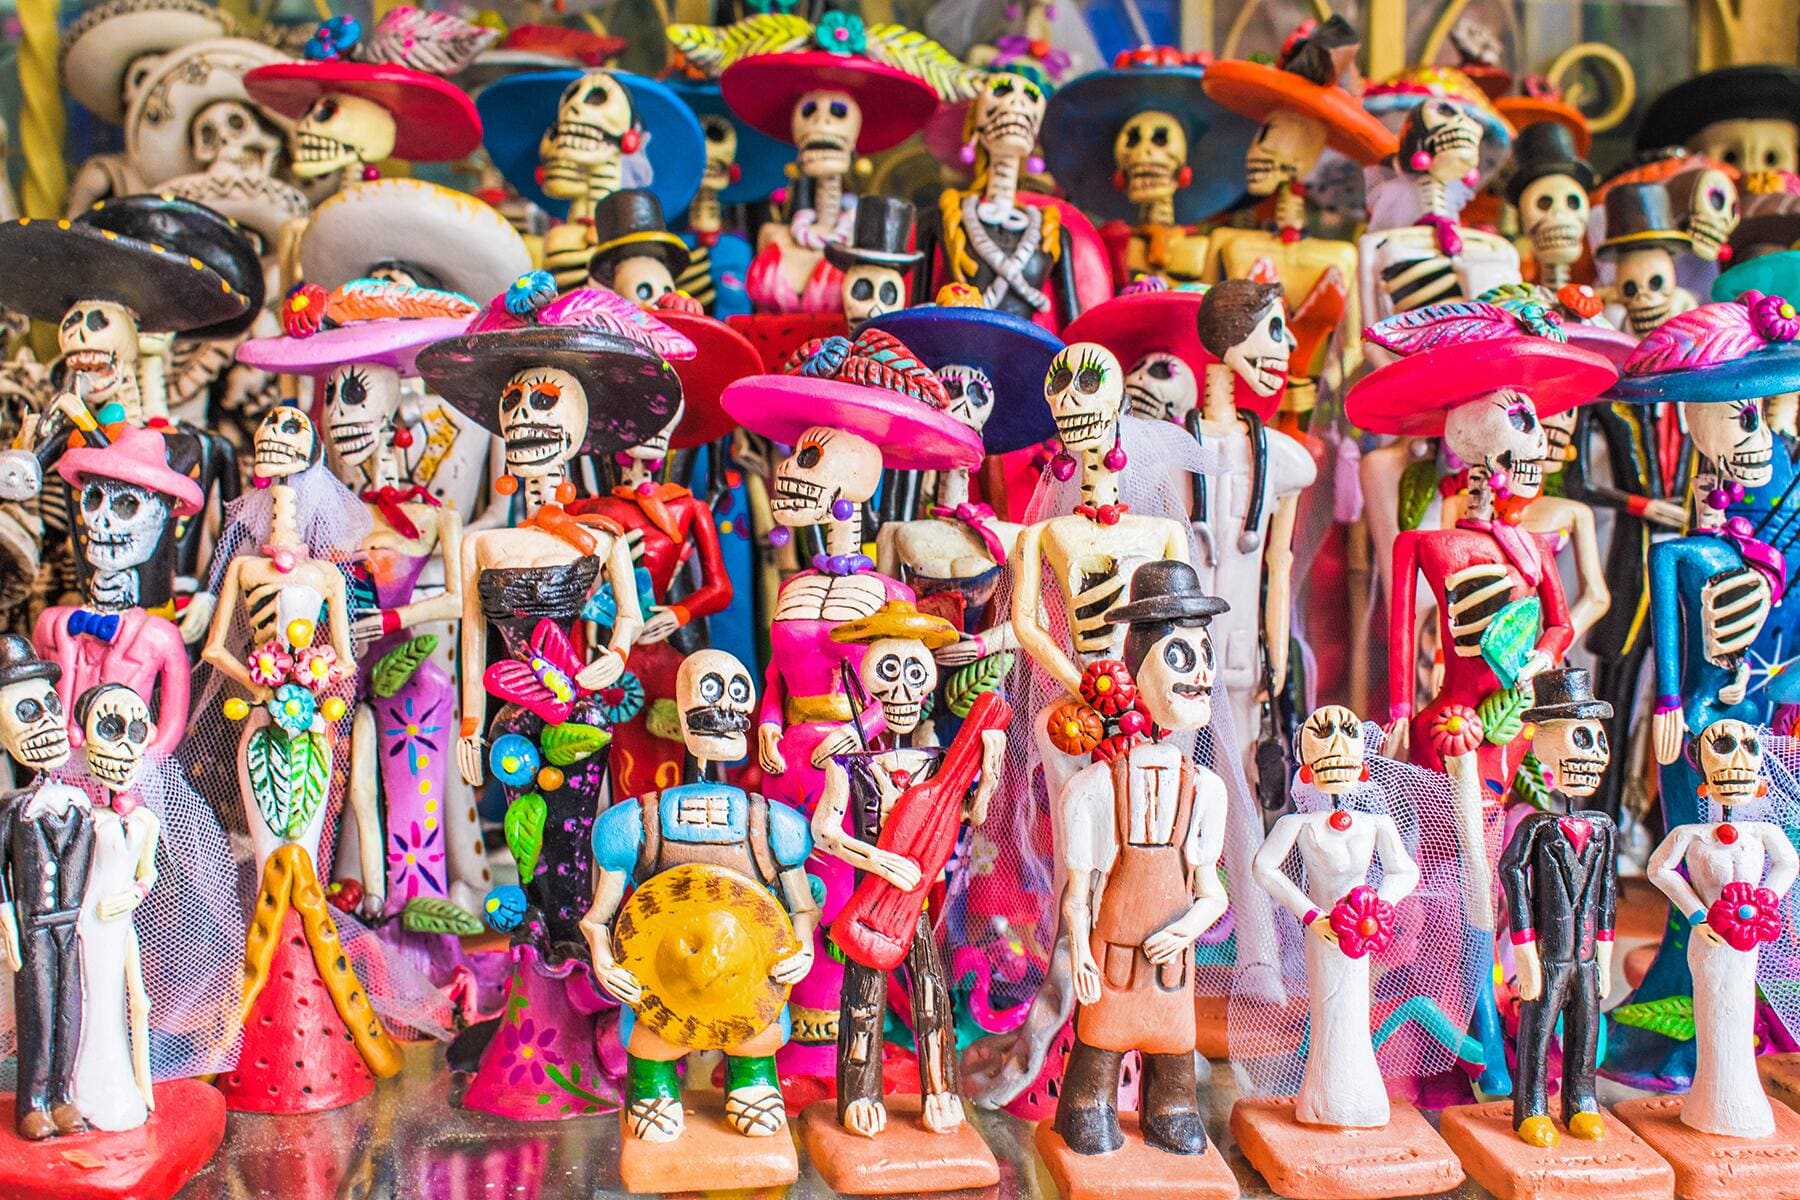 <a href='https://www.fodors.com/world/mexico-and-central-america/mexico/experiences/news/photos/dont-do-these-things-when-visiting-mexico#'>From &quot;17 Things Not Do When Visiting Mexico’s Coastal Towns: Don’t Just Buy Mass-Produced Souvenirs&quot;</a>